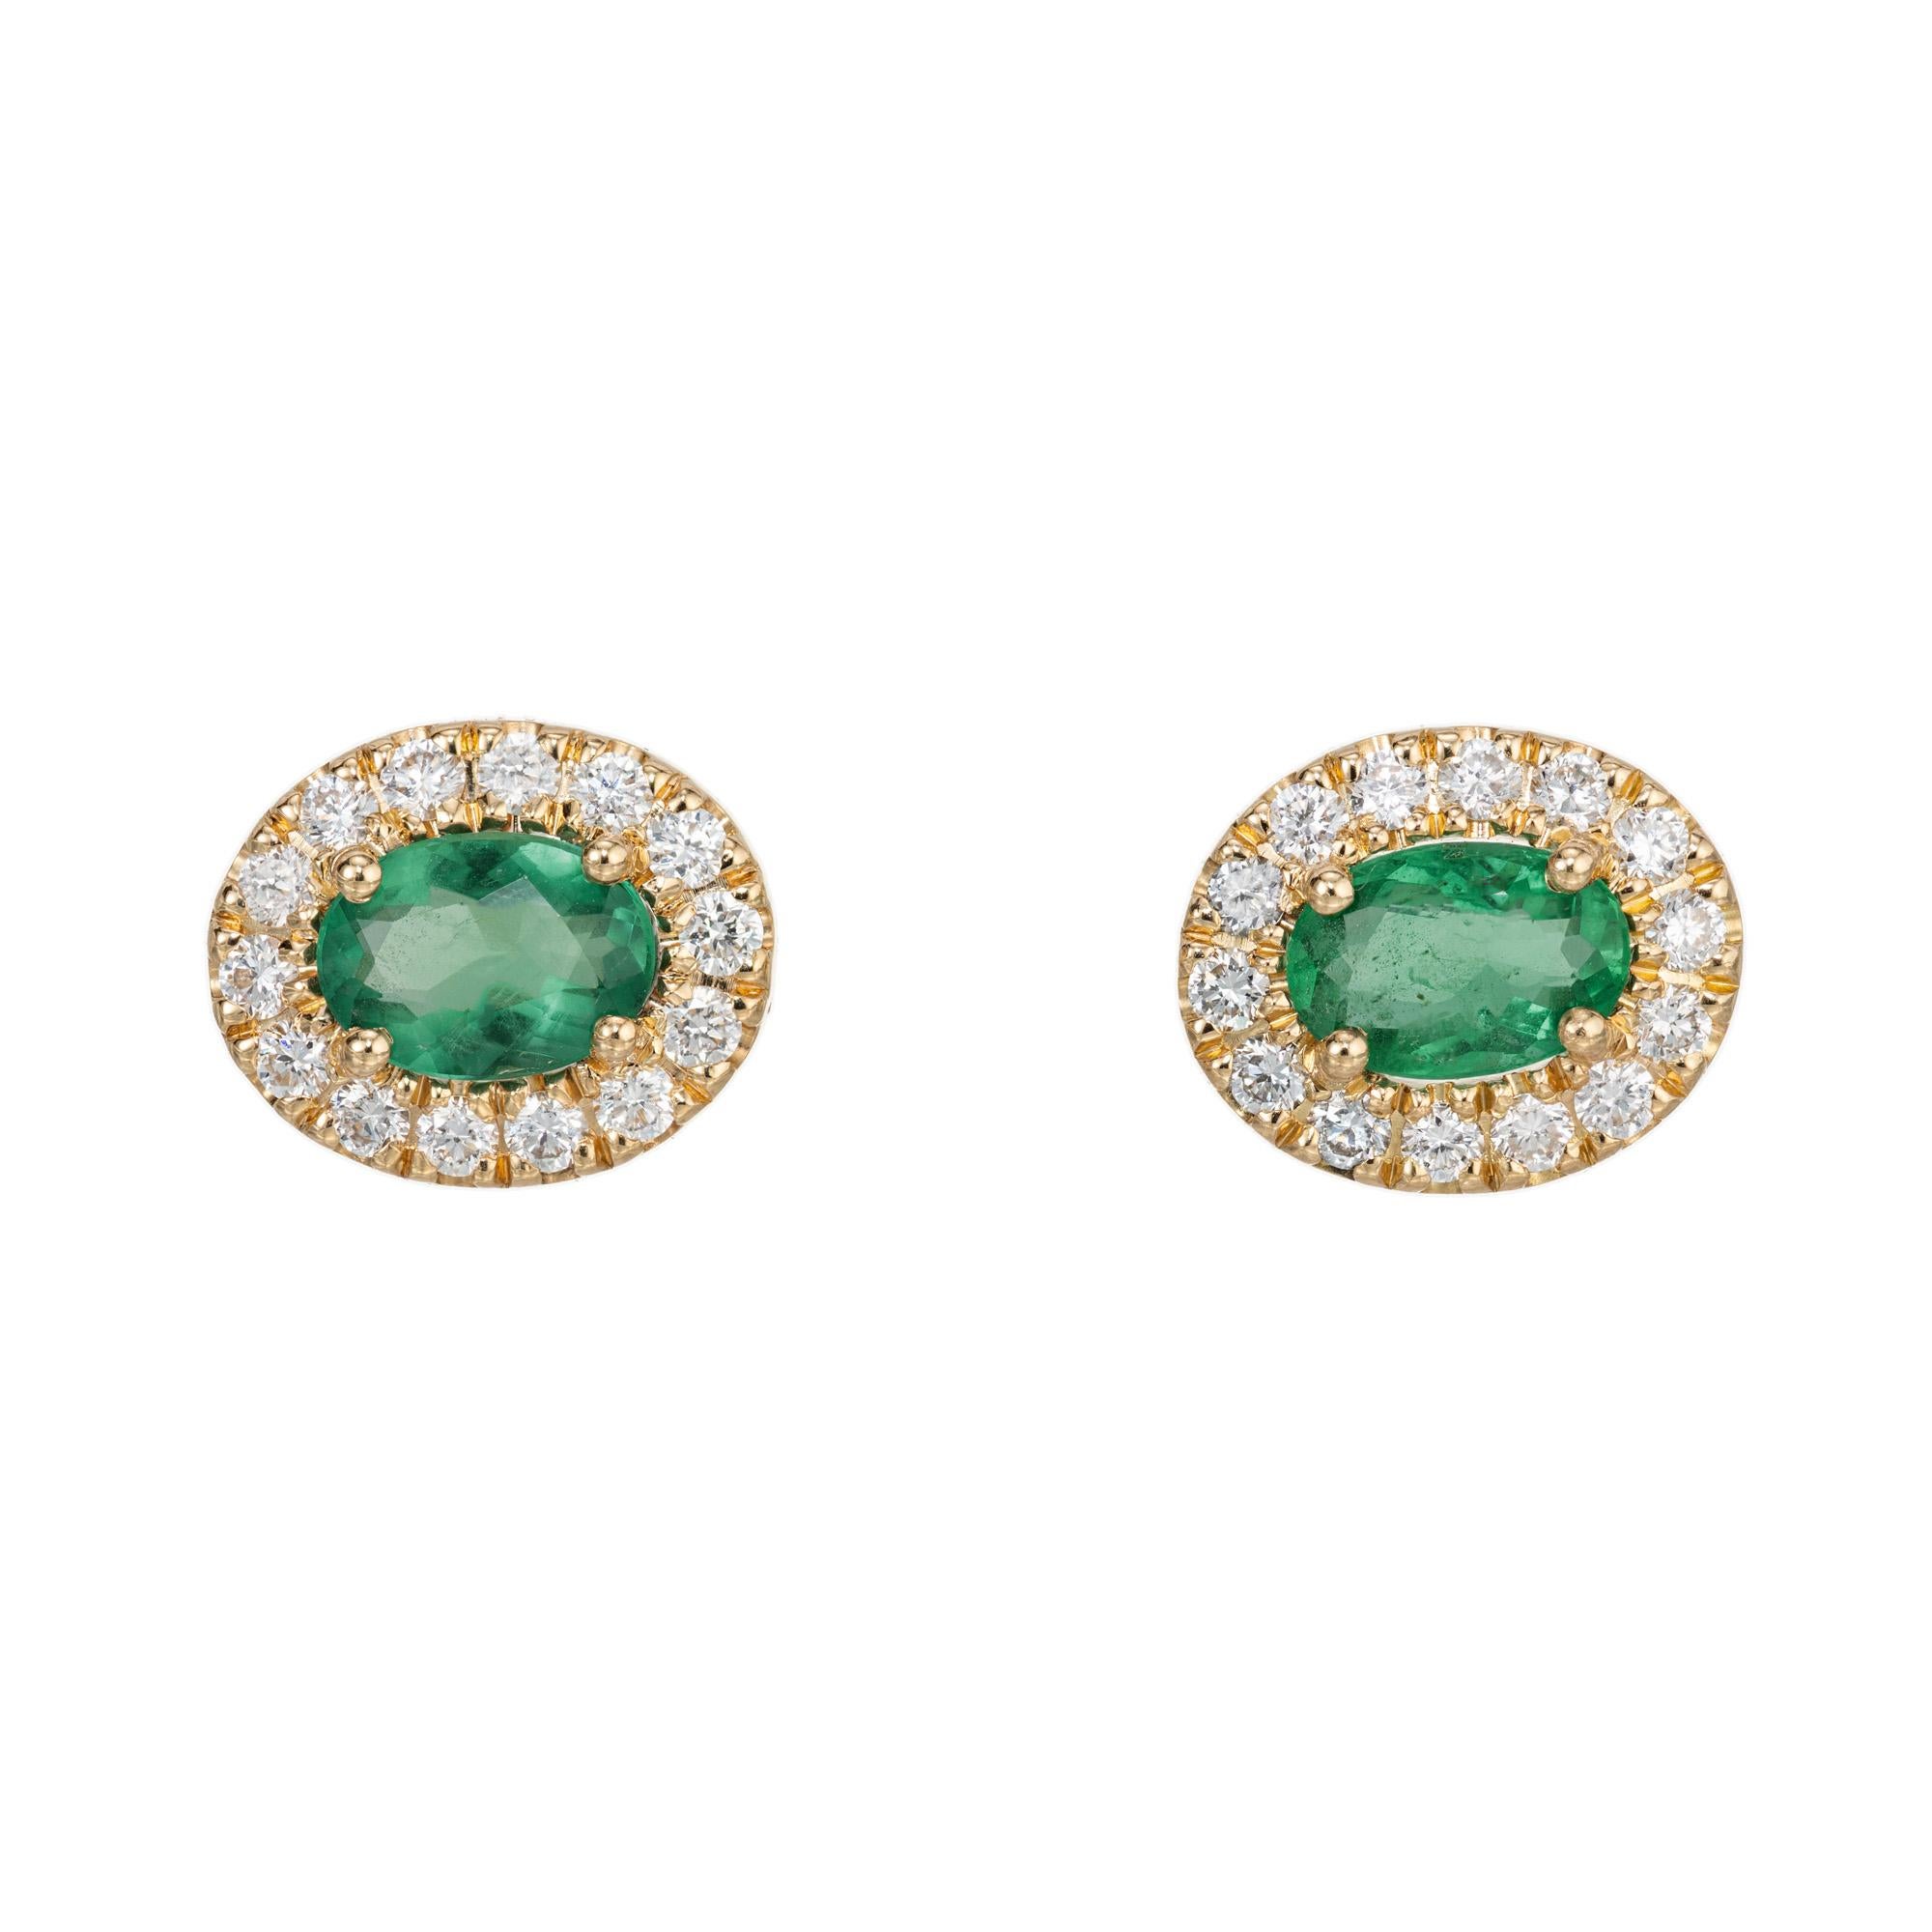 Emerald and diamond earring. 2 oval bright green emeralds totaling .81cts set in 18k yellow gold settings. Each gemstone has a halo of 14 round brilliant cut white diamonds. Designed and crafted in the Peter Suchy Workshop.

Follow us on our 1stdibs